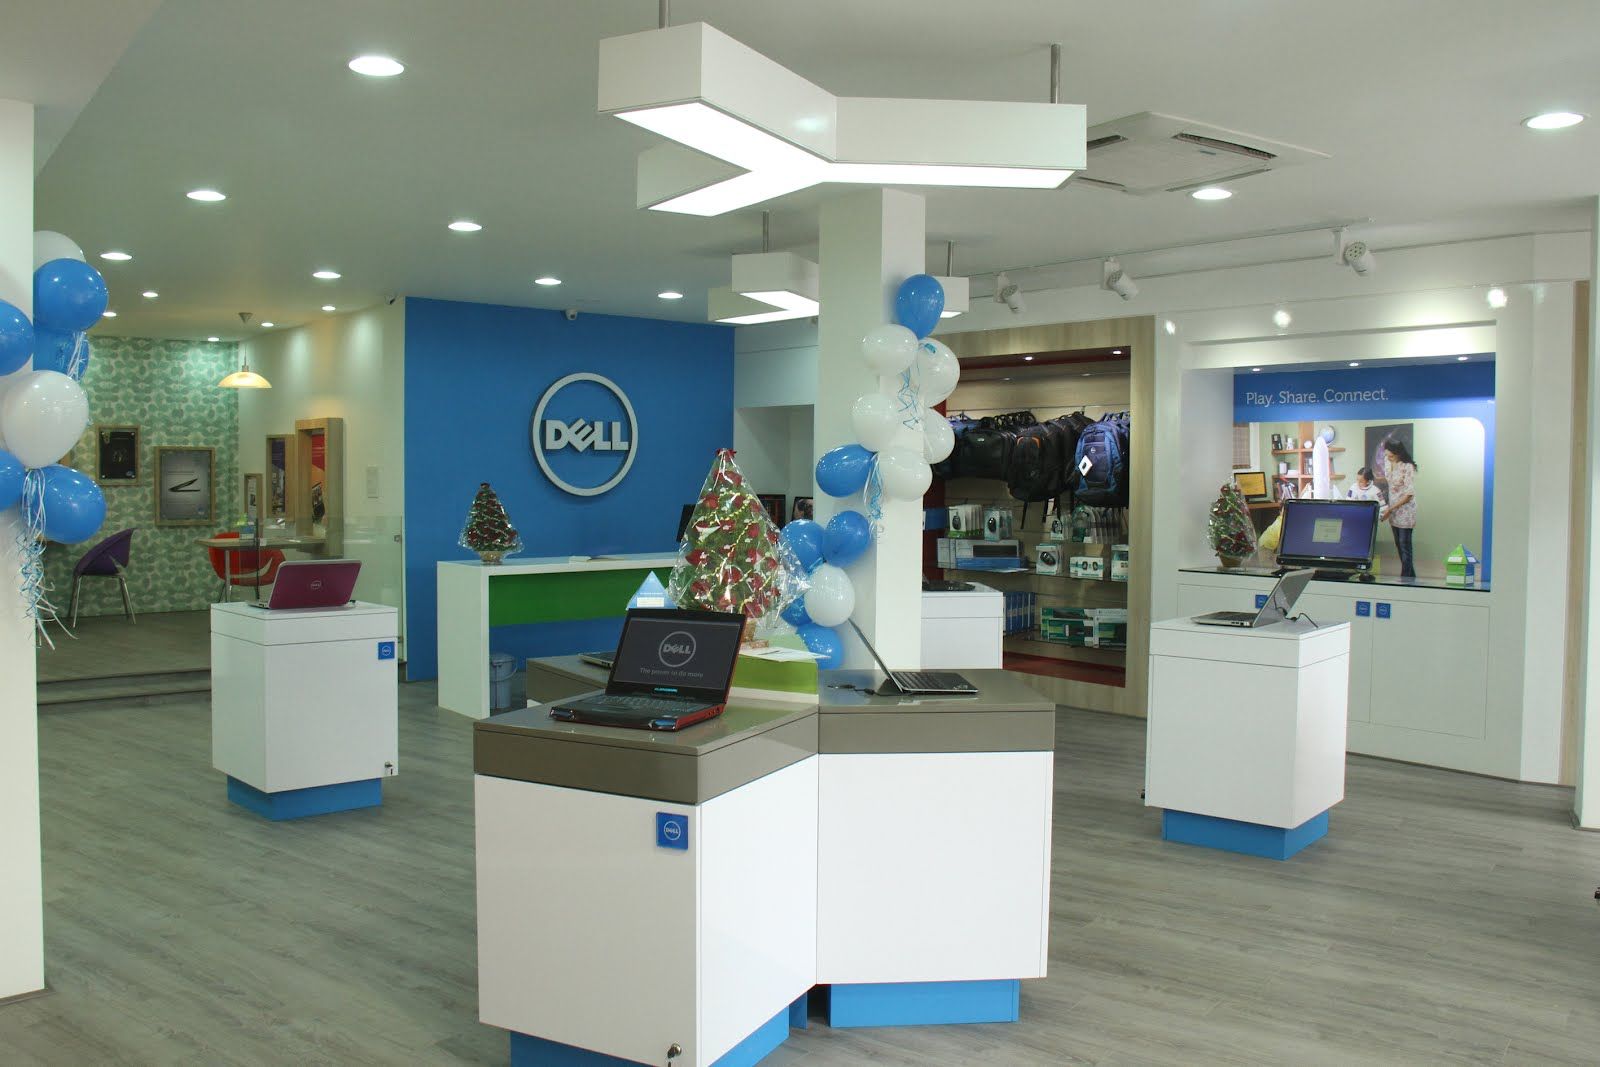 “One-third of our business comes from SMBs,” P Krishnakumar, Dell India